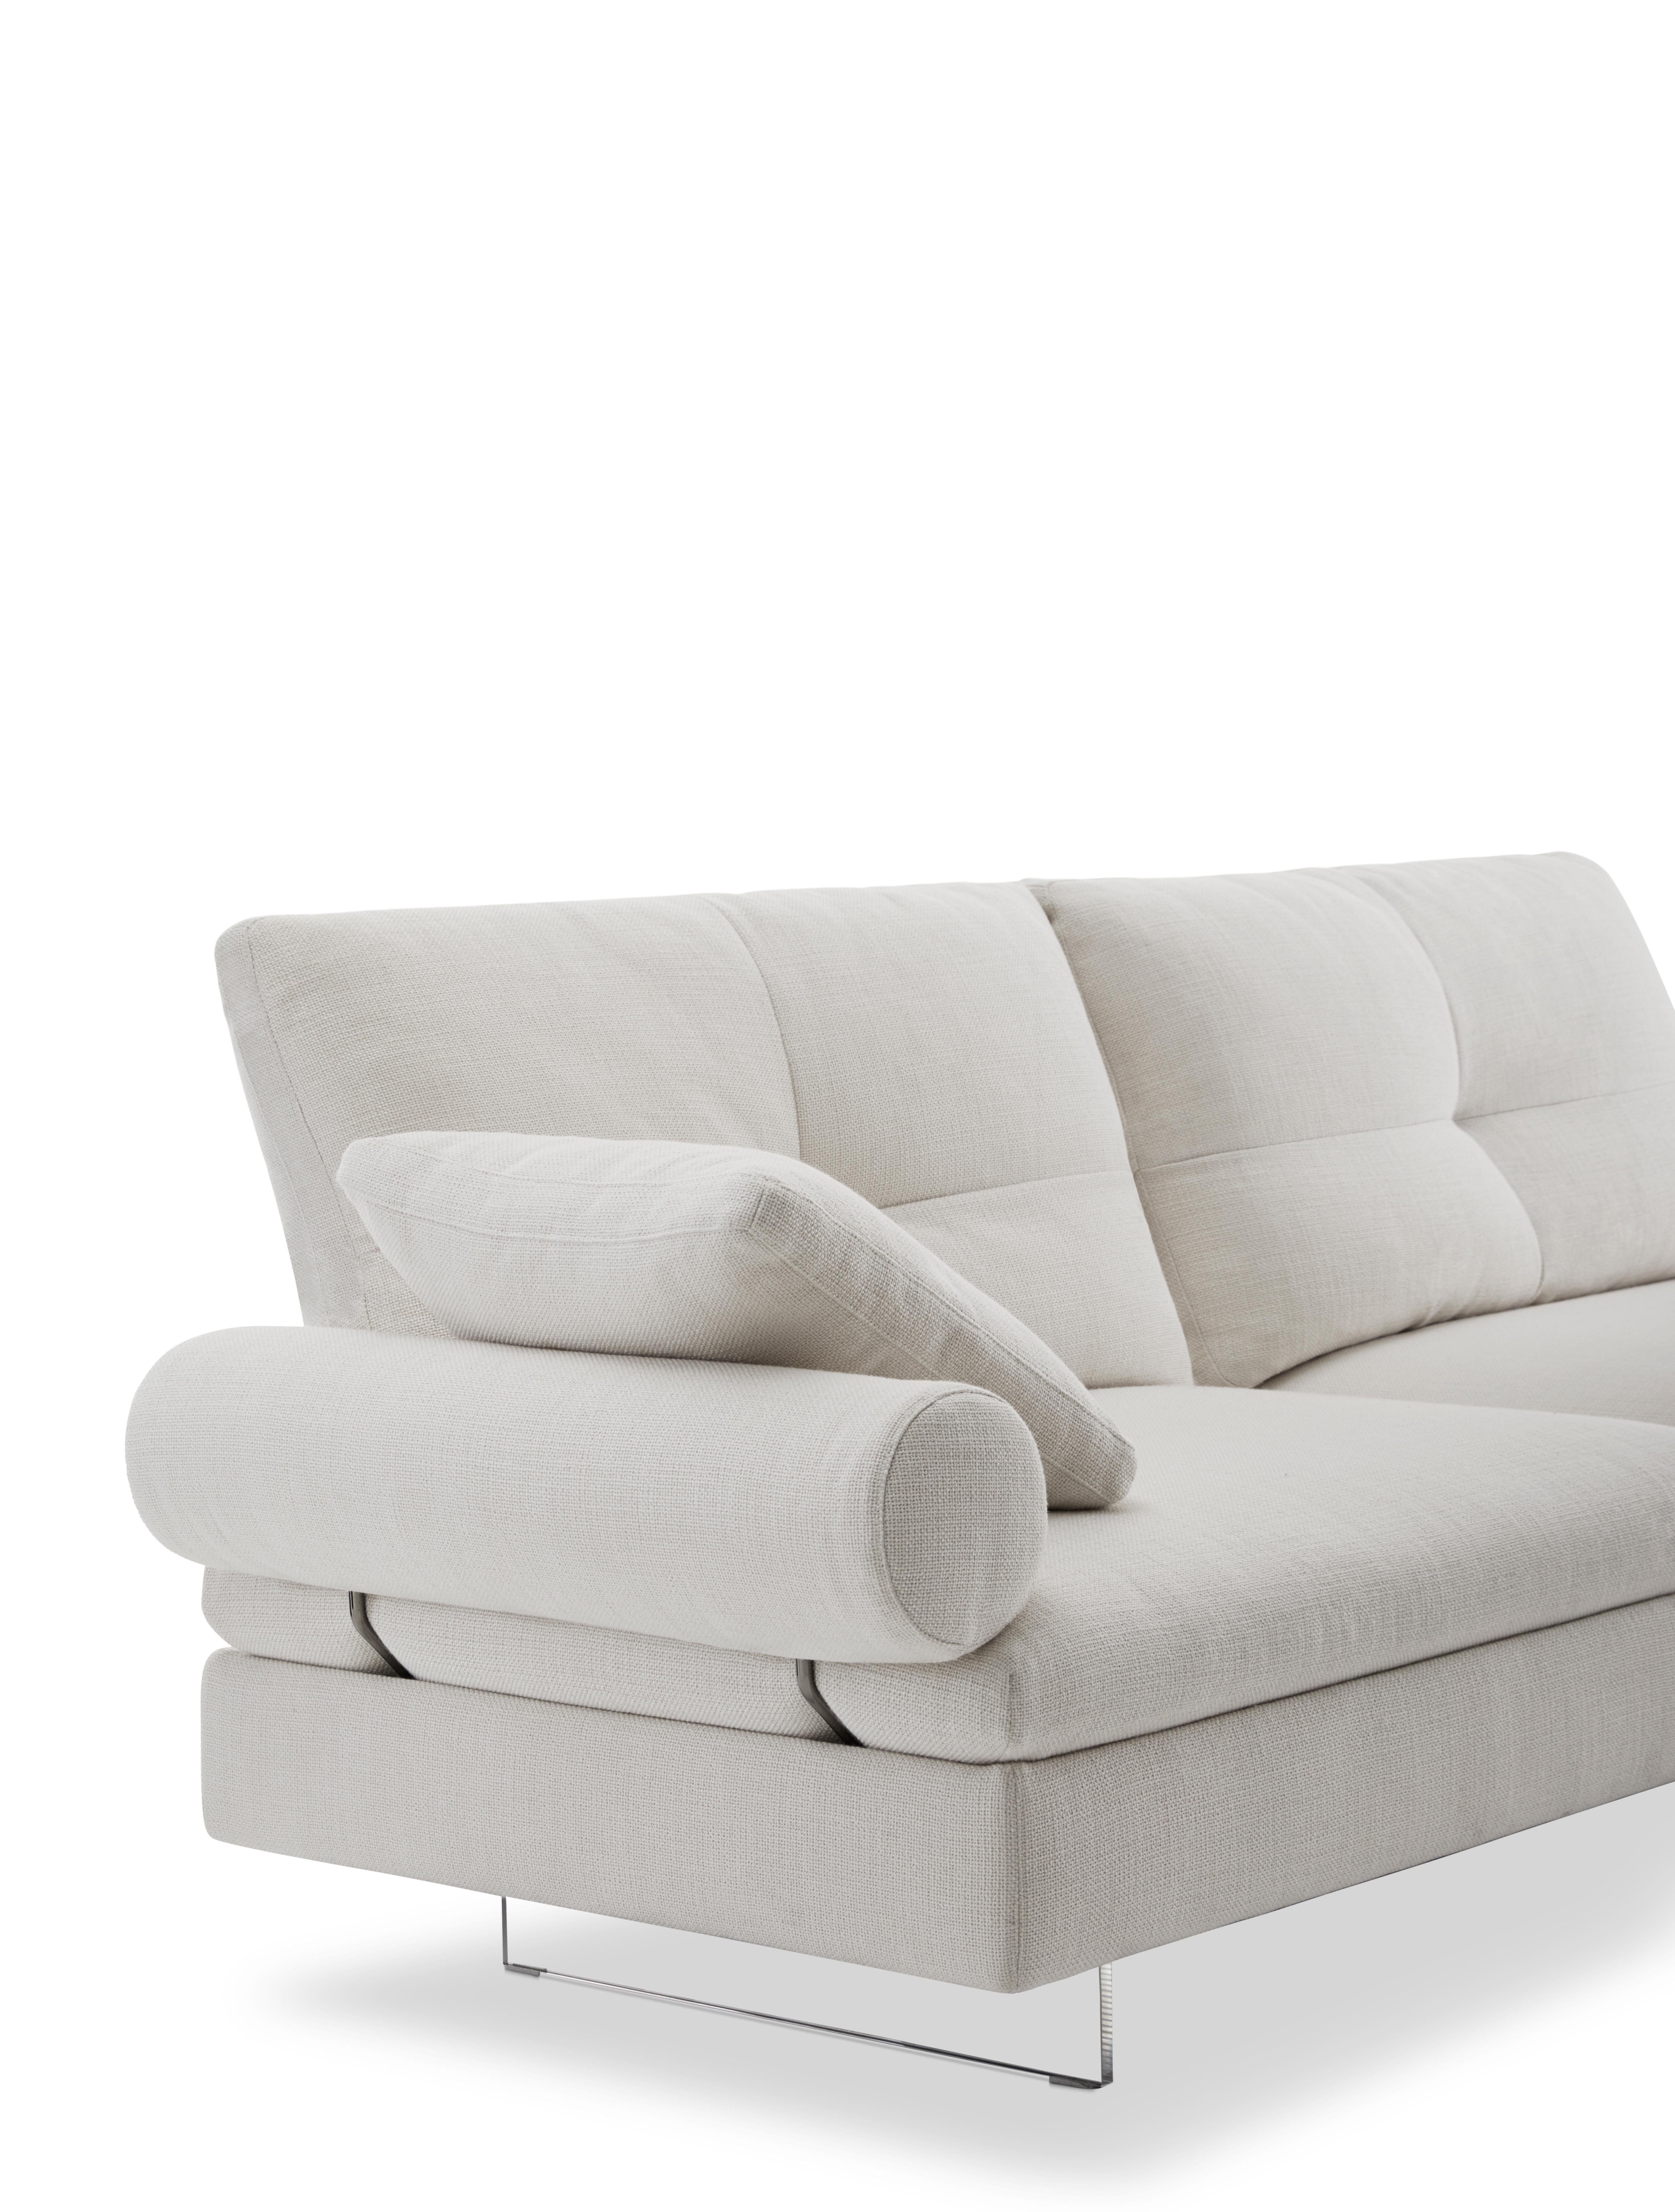 Modern Limes New 80 Large Sofa in Beige Upholstery with Roll Armrest by Sergio Bicego For Sale